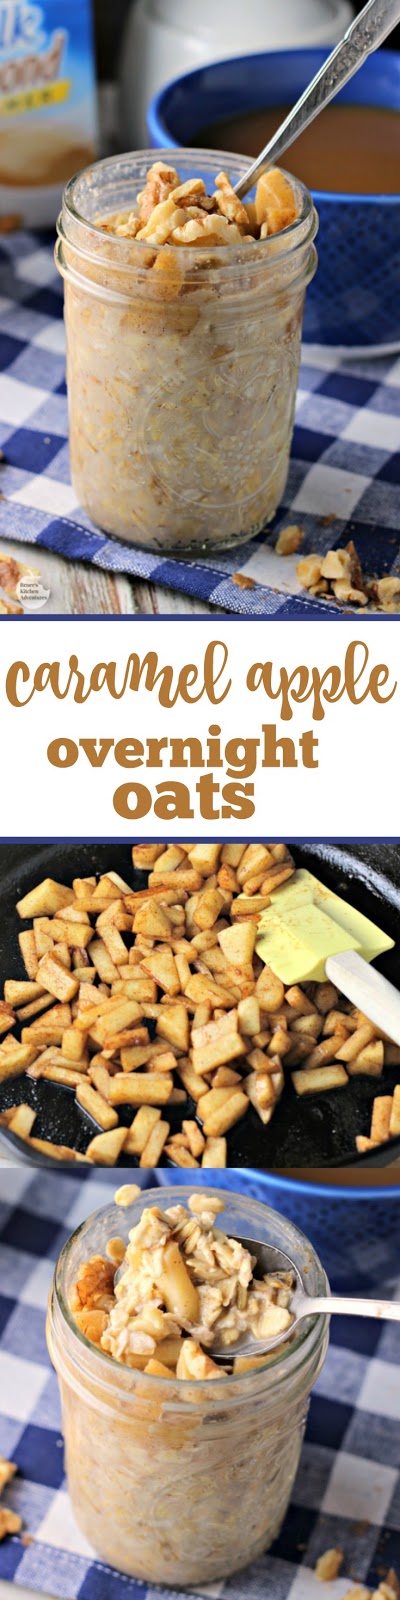 Caramel Apple Overnight Oats | by Renee's Kitchen Adventures - easy recipe for caramel apple flavored no bake oatmeal perfect for breakfast on-the-go! #SilkSiptoSpoon ad #RKArecipes